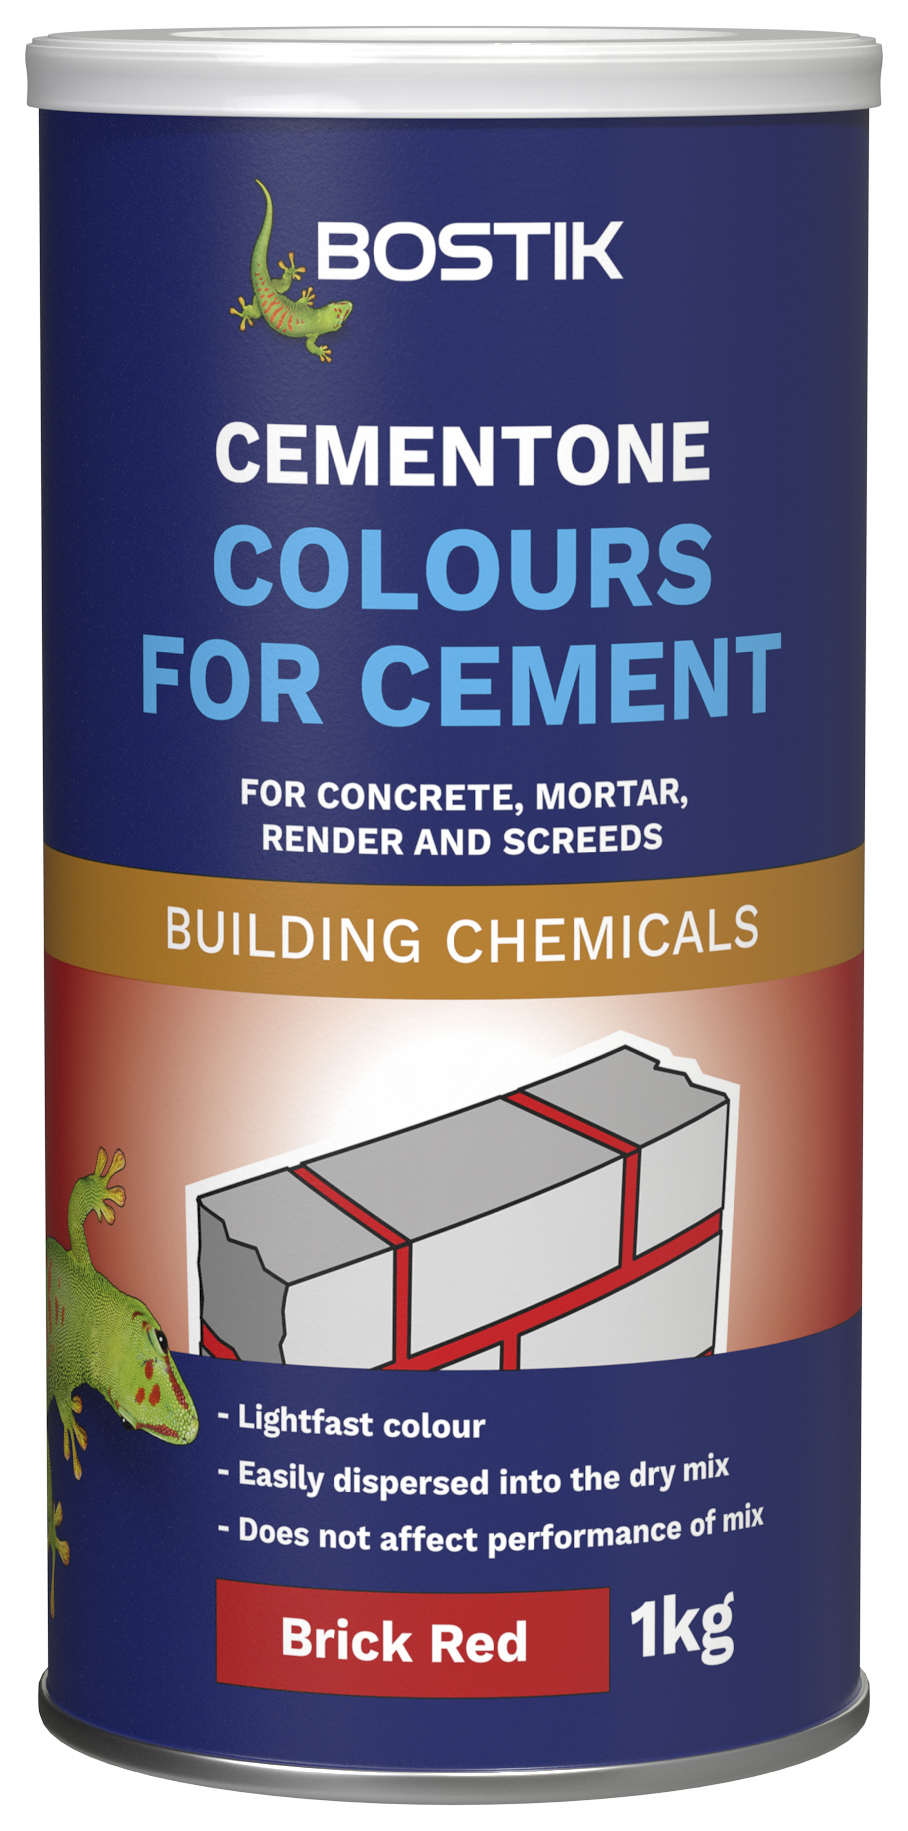 Image of Bostik 1kg Cementone Colours for Cement - Brick Red